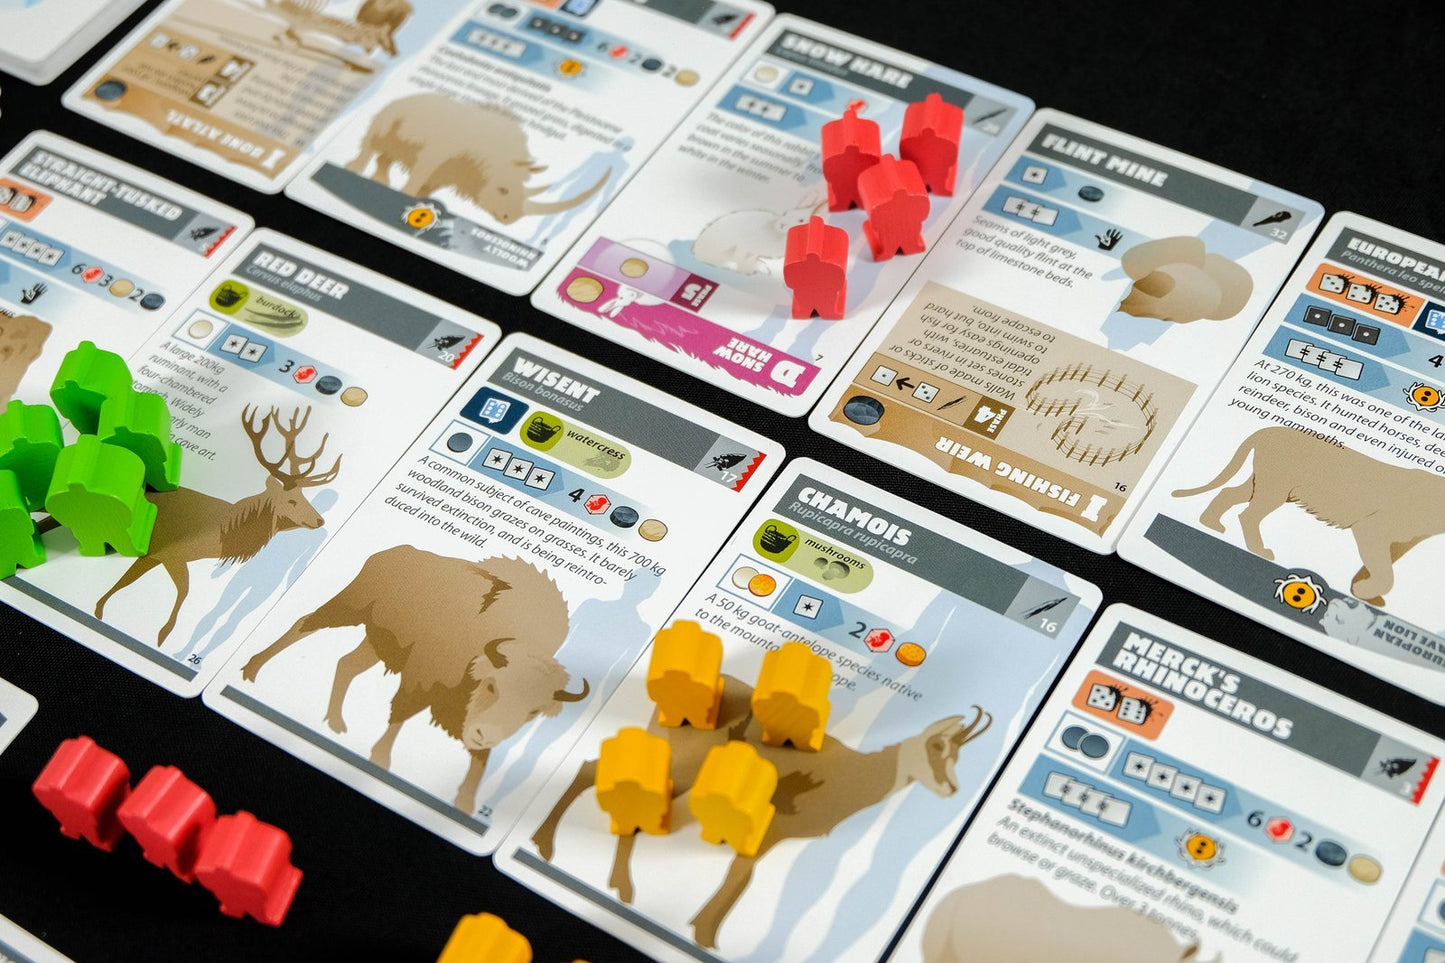 Neanderthal Board Game (2nd edition) - Expanded view of placards, cards, and tribesmen game play pieces